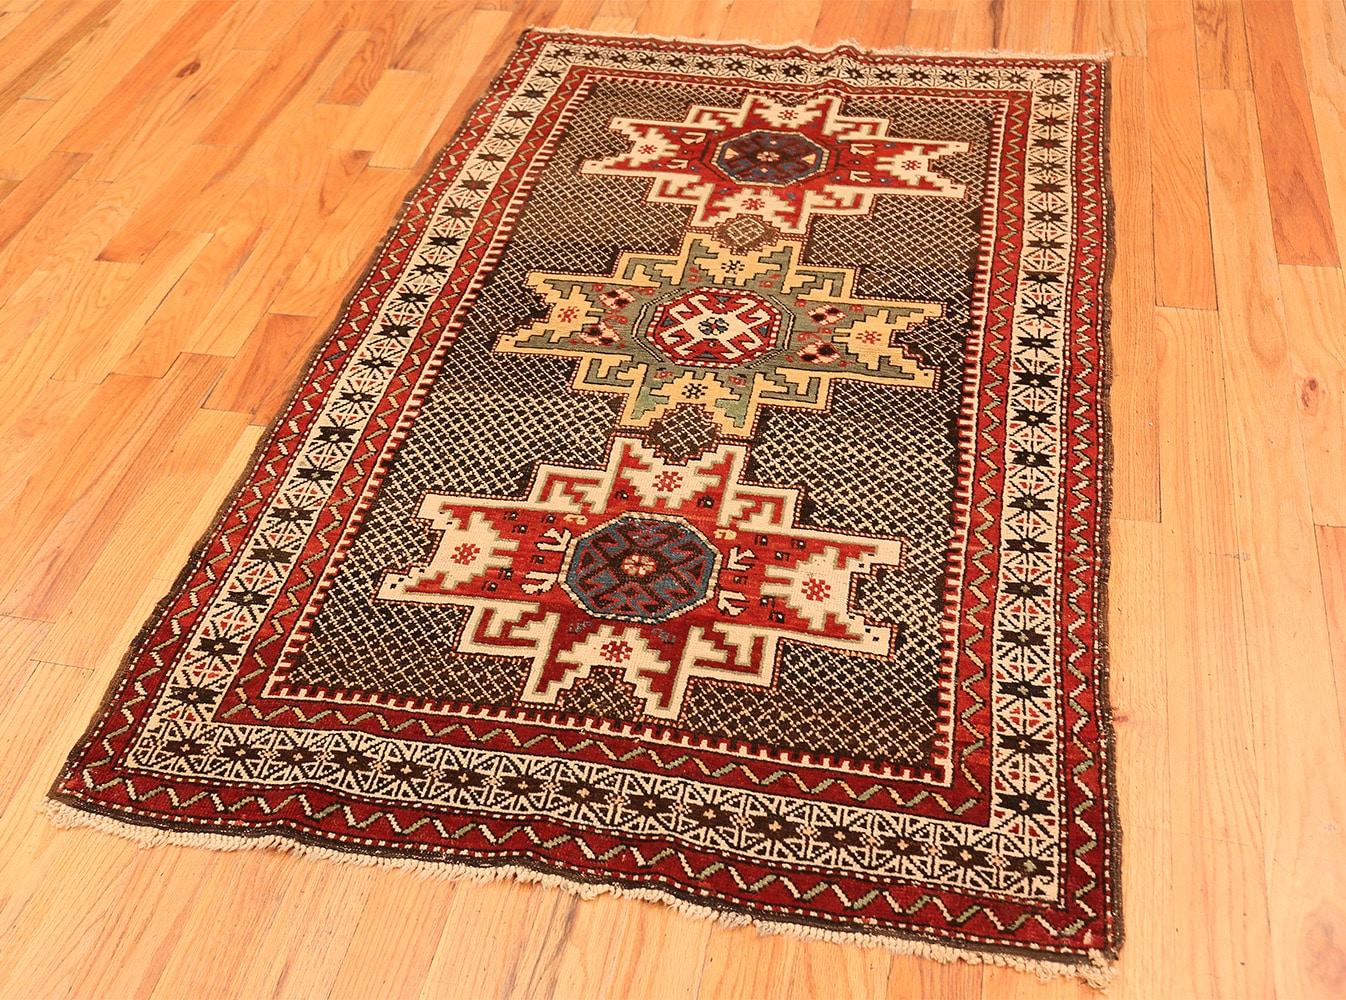 20th Century Small Tribal Antique Caucasian Kuba Rug. Size: 3 ft 6 in x 5 ft 6 in